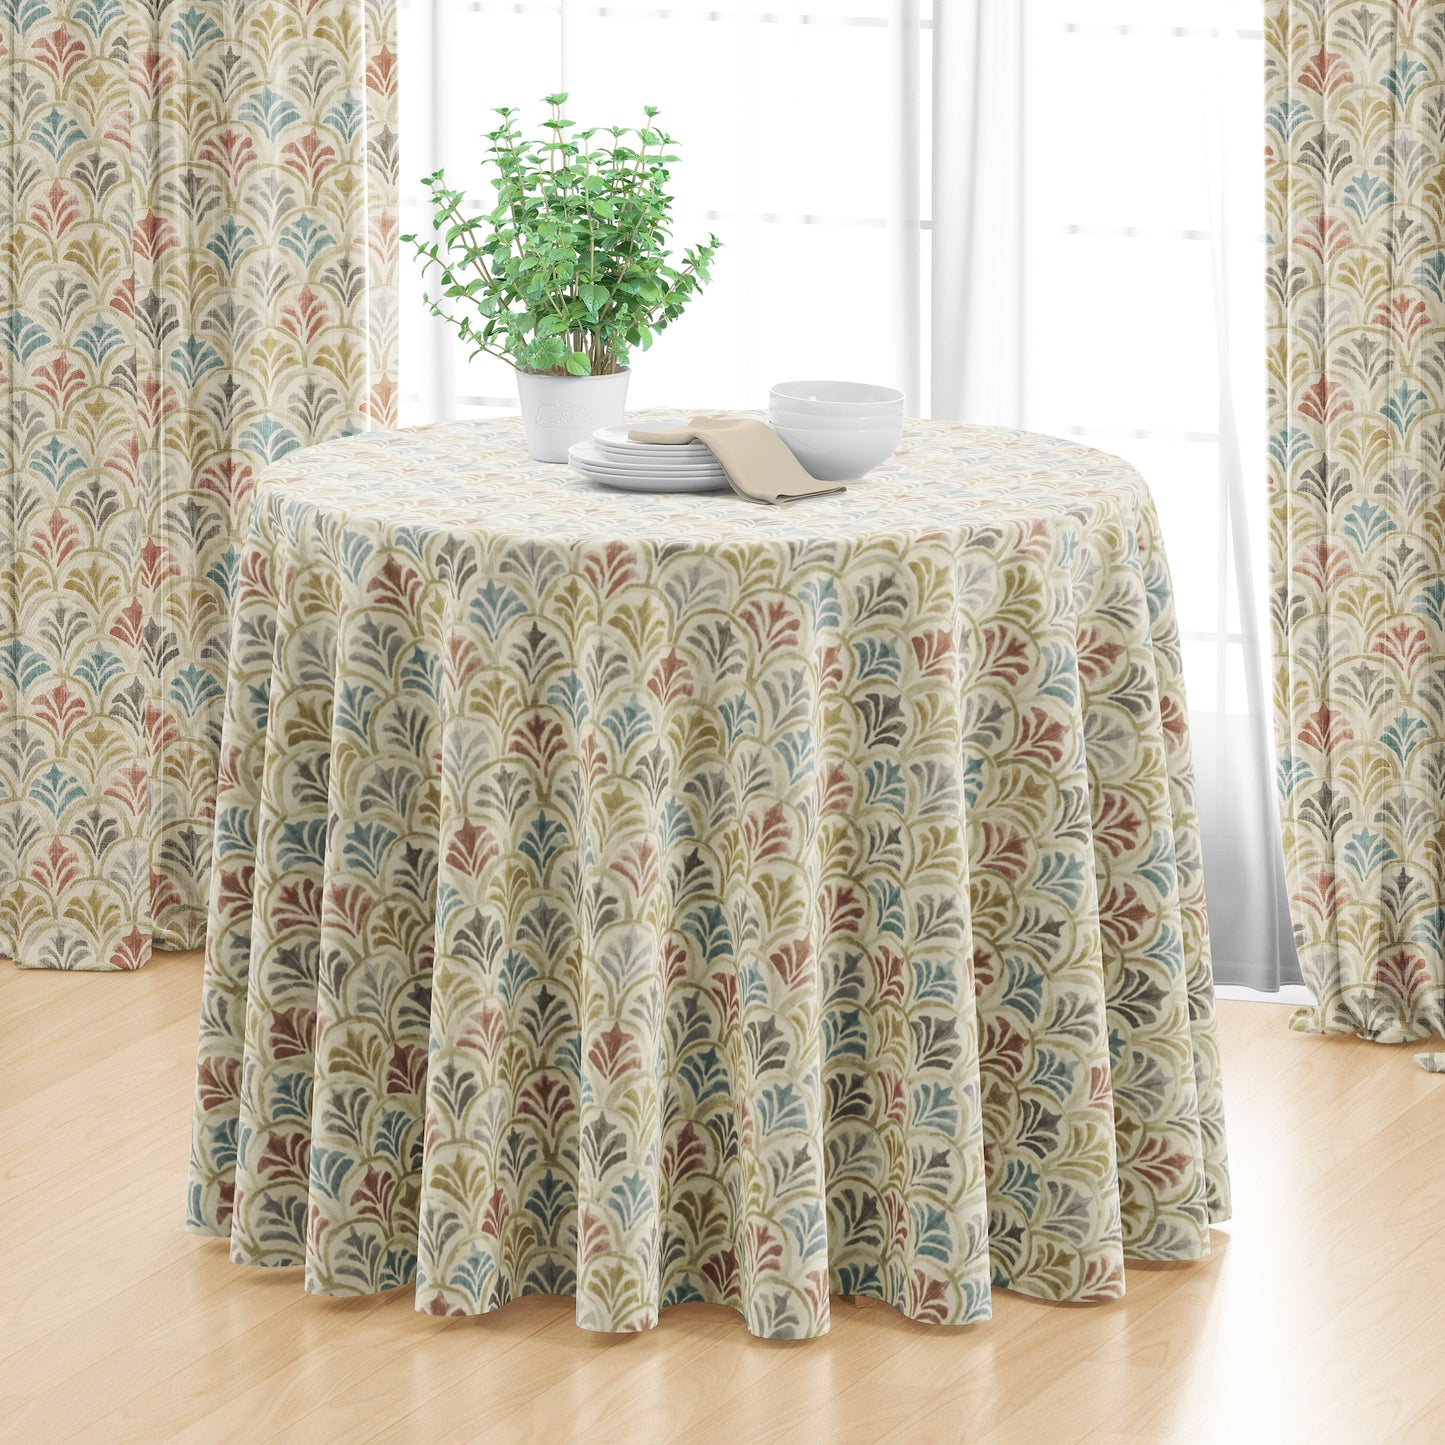 Round Tablecloth in Countess Tuscan Scallop Watercolor- Blue, Terracotta, Gray, Tan